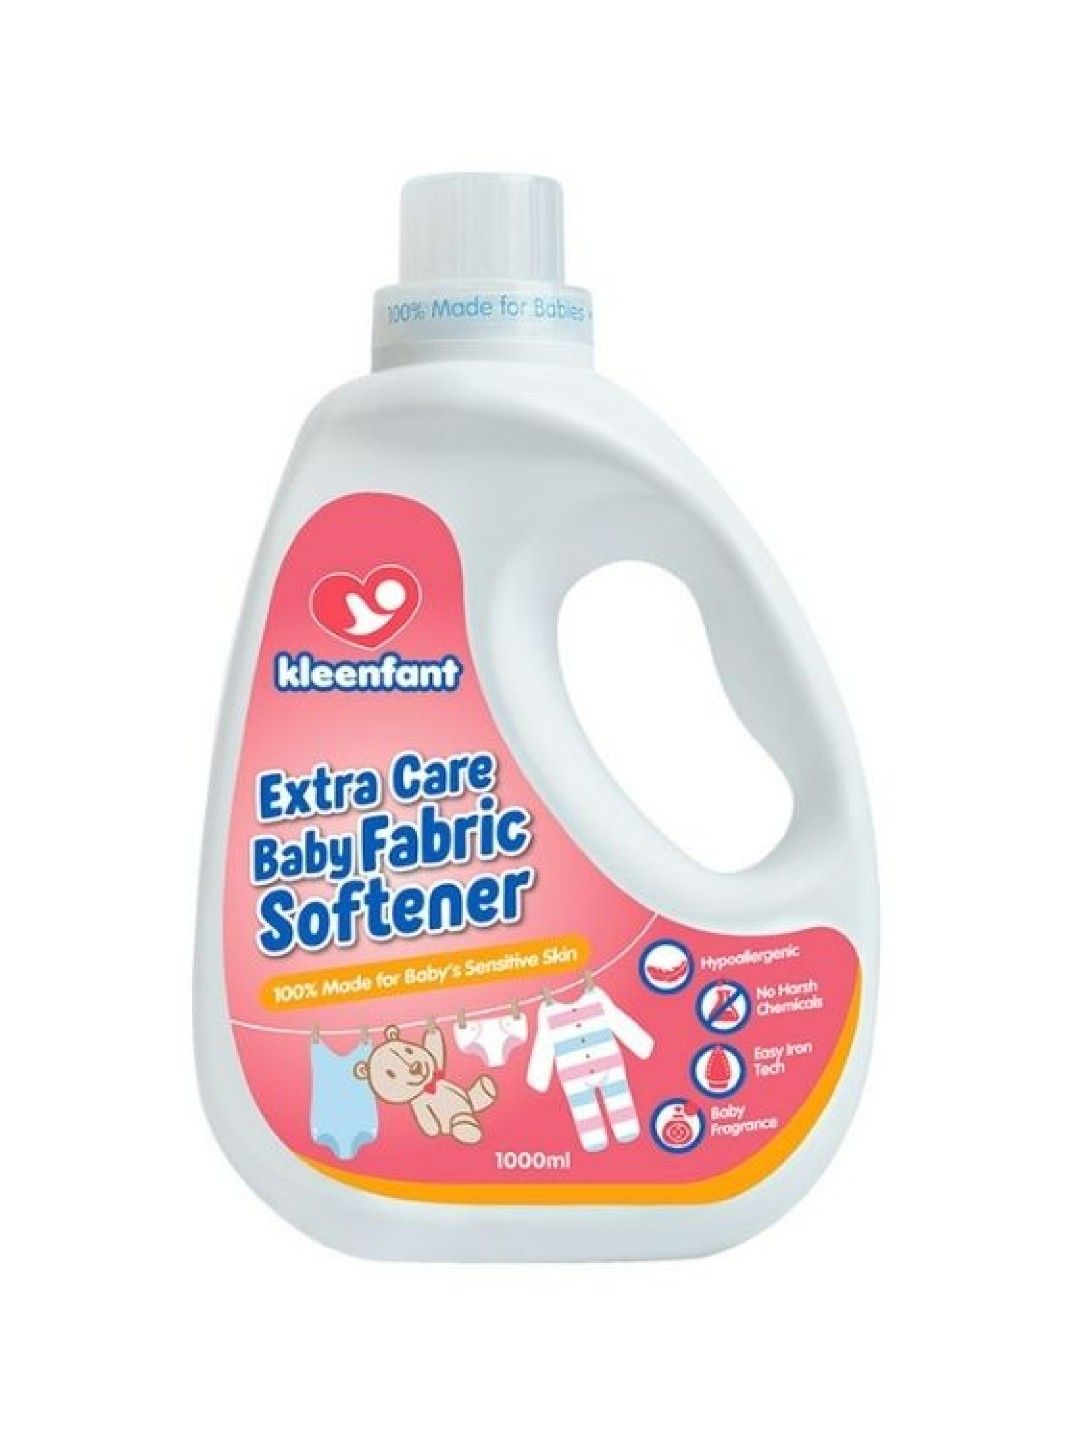 Kleenfant Extra Care Baby Fabric Softener (1L)